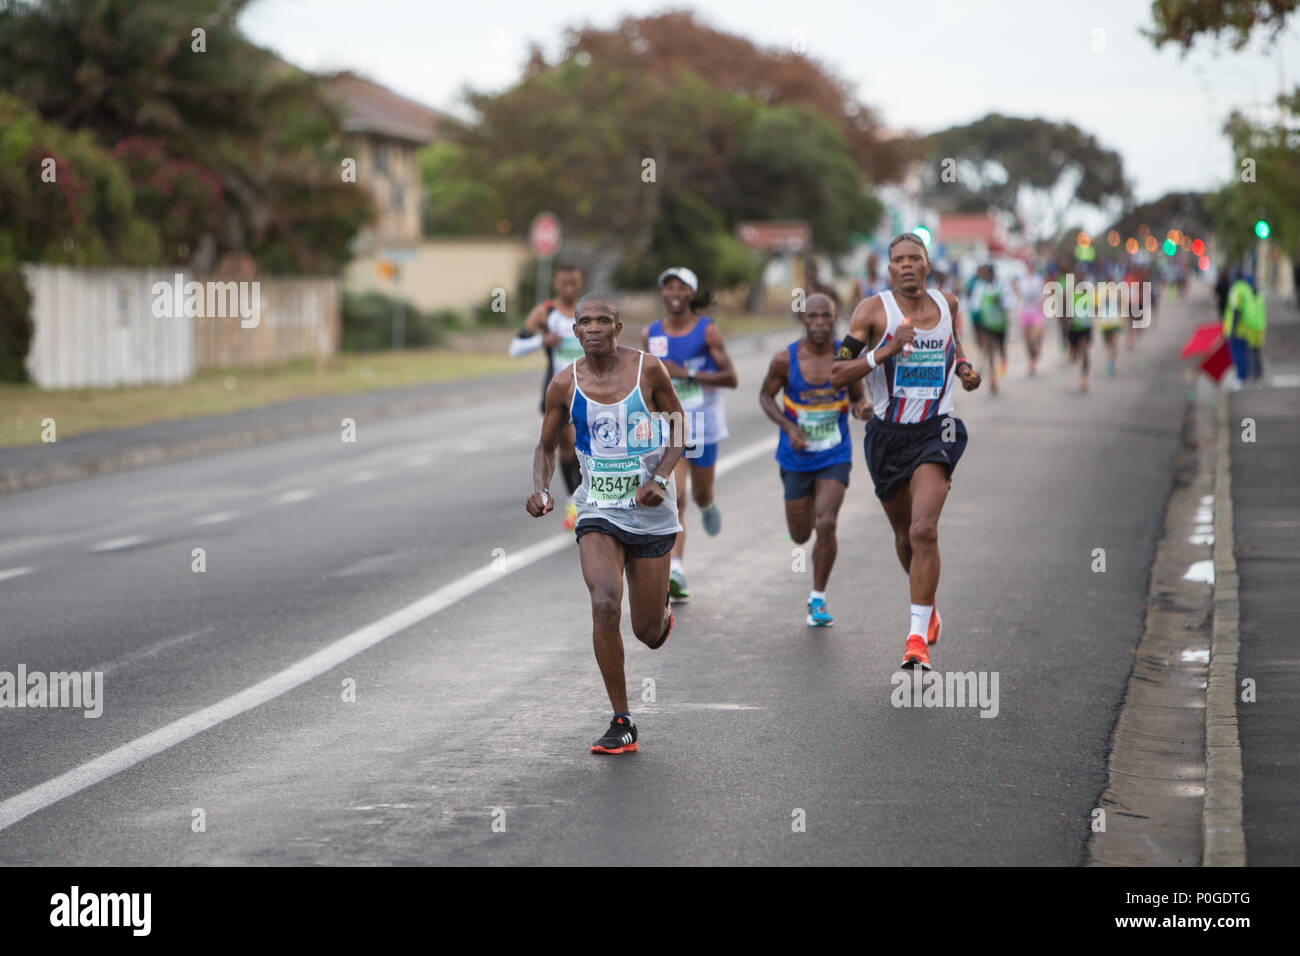 A man leading the race during a two oceans ultra marathon Stock Photo